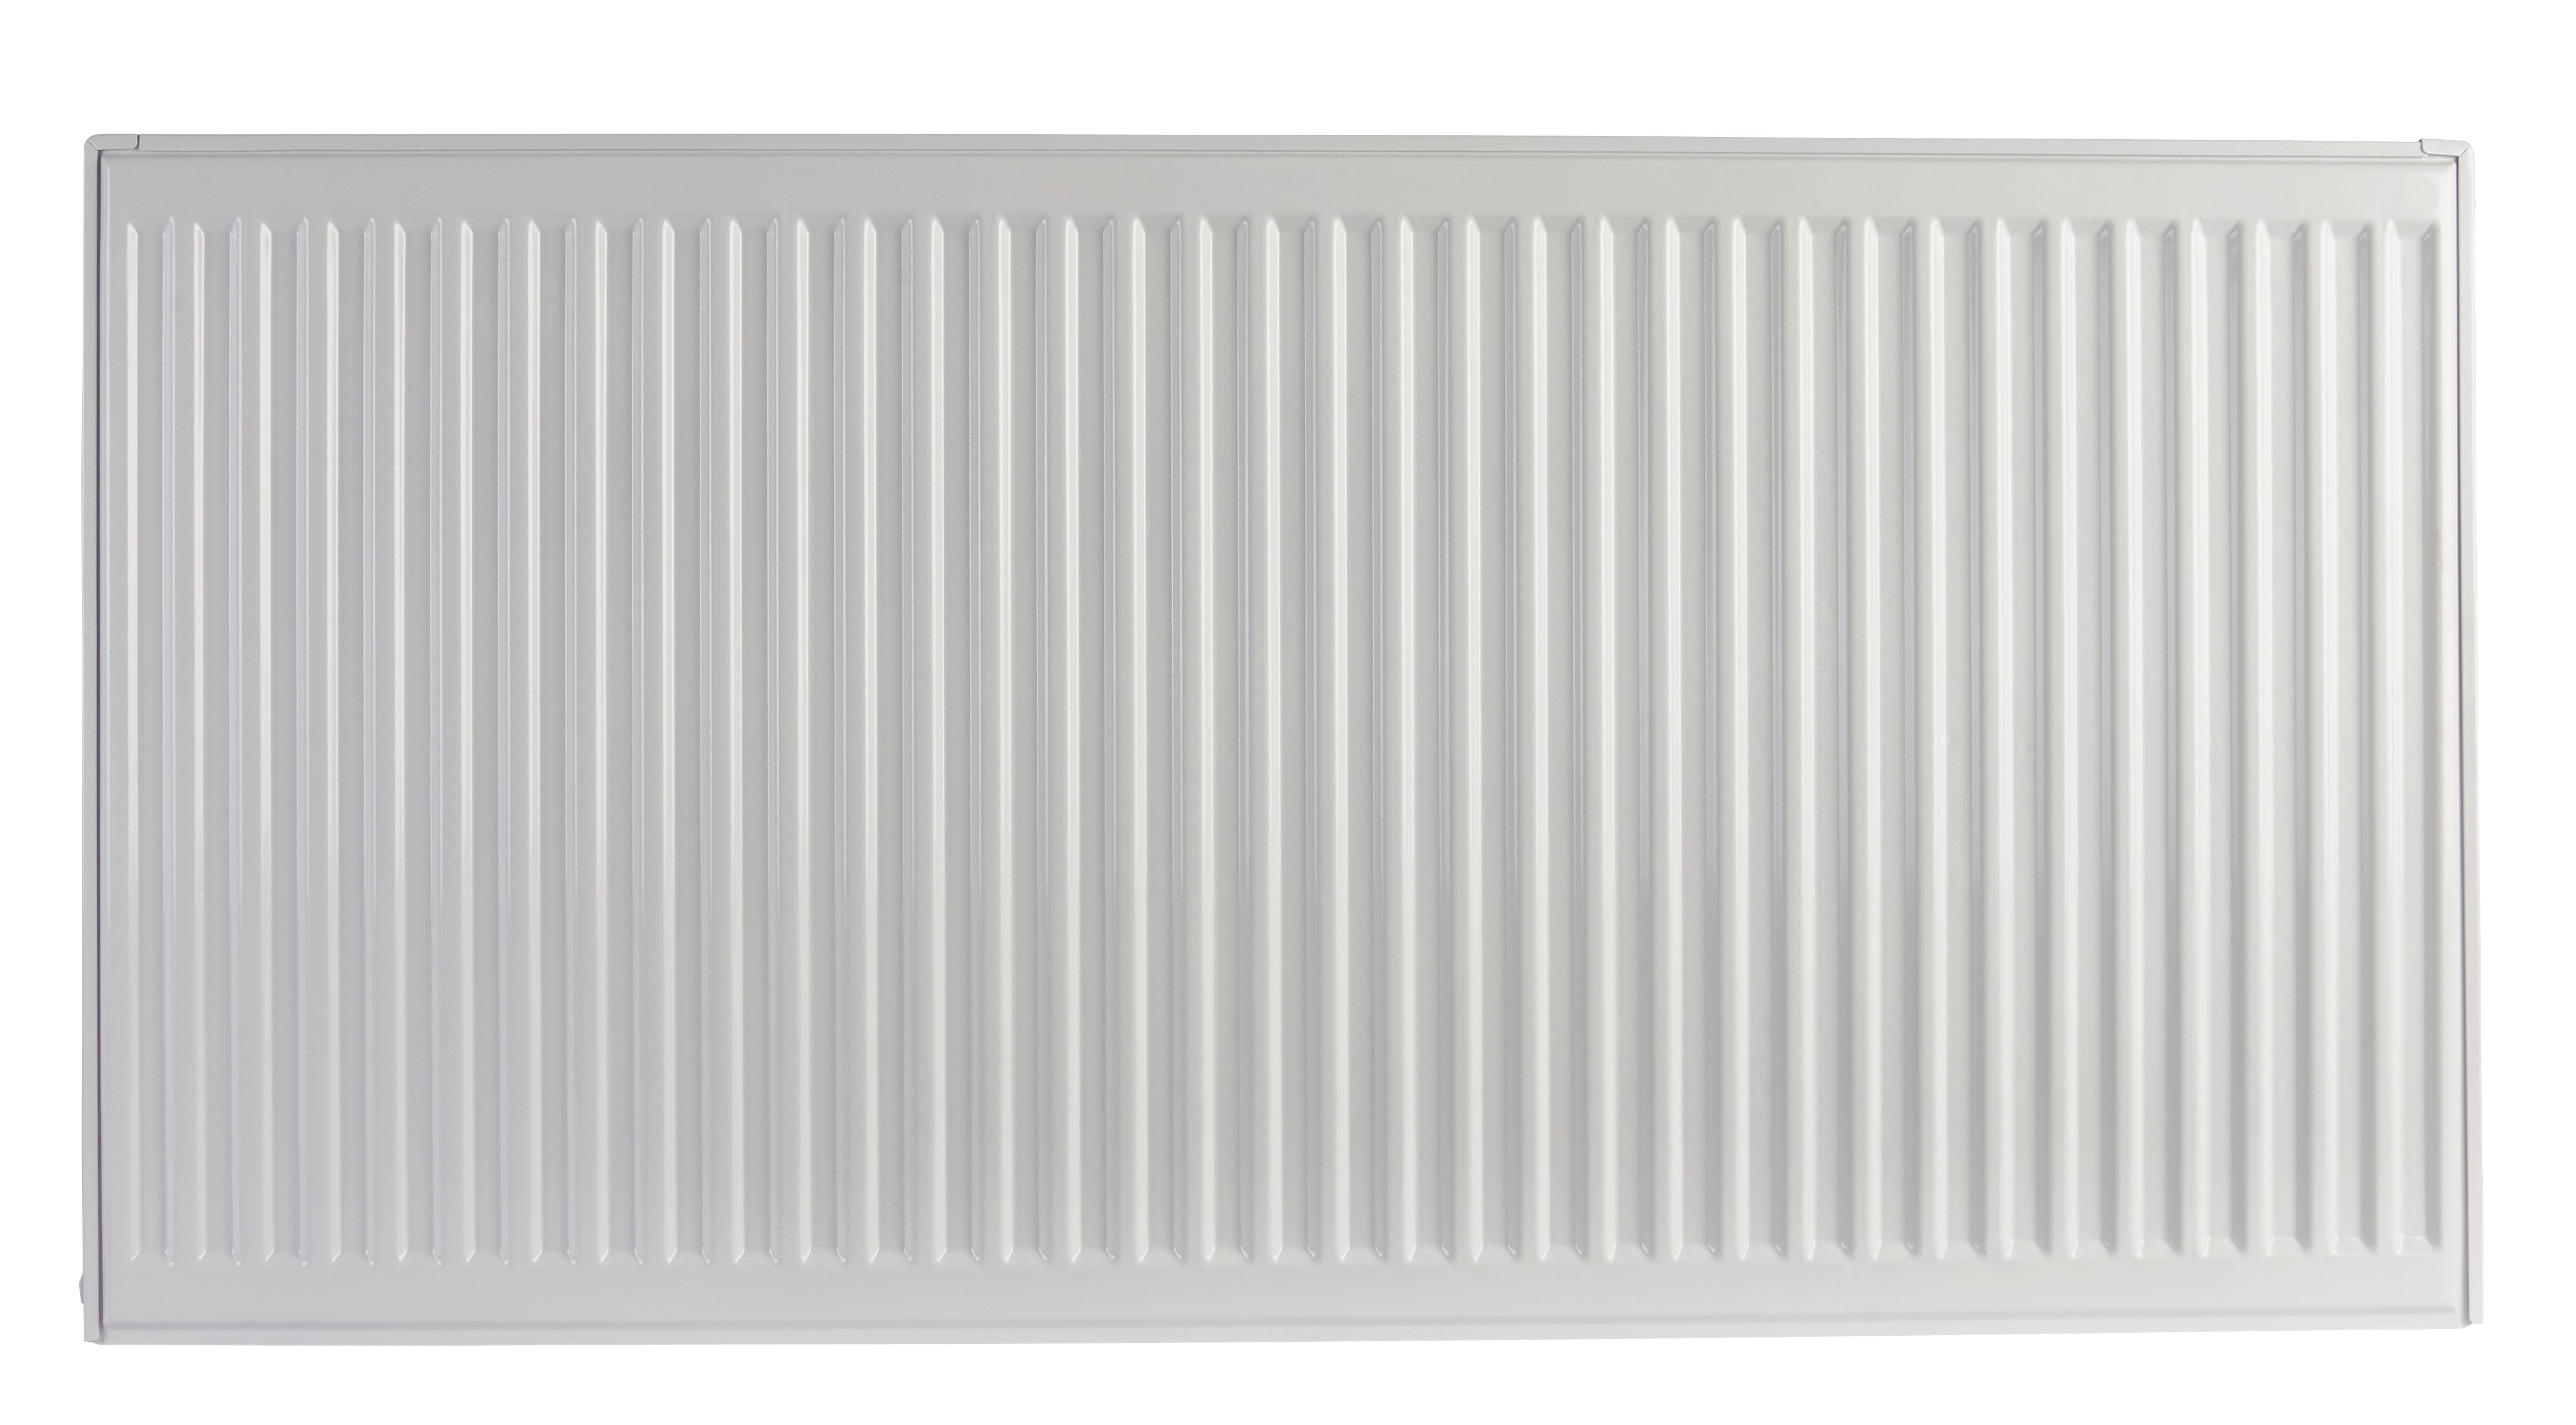 Image of Homeline by Stelrad 600 x 1100mm Type 21 Double Panel Plus Single Convector Radiator